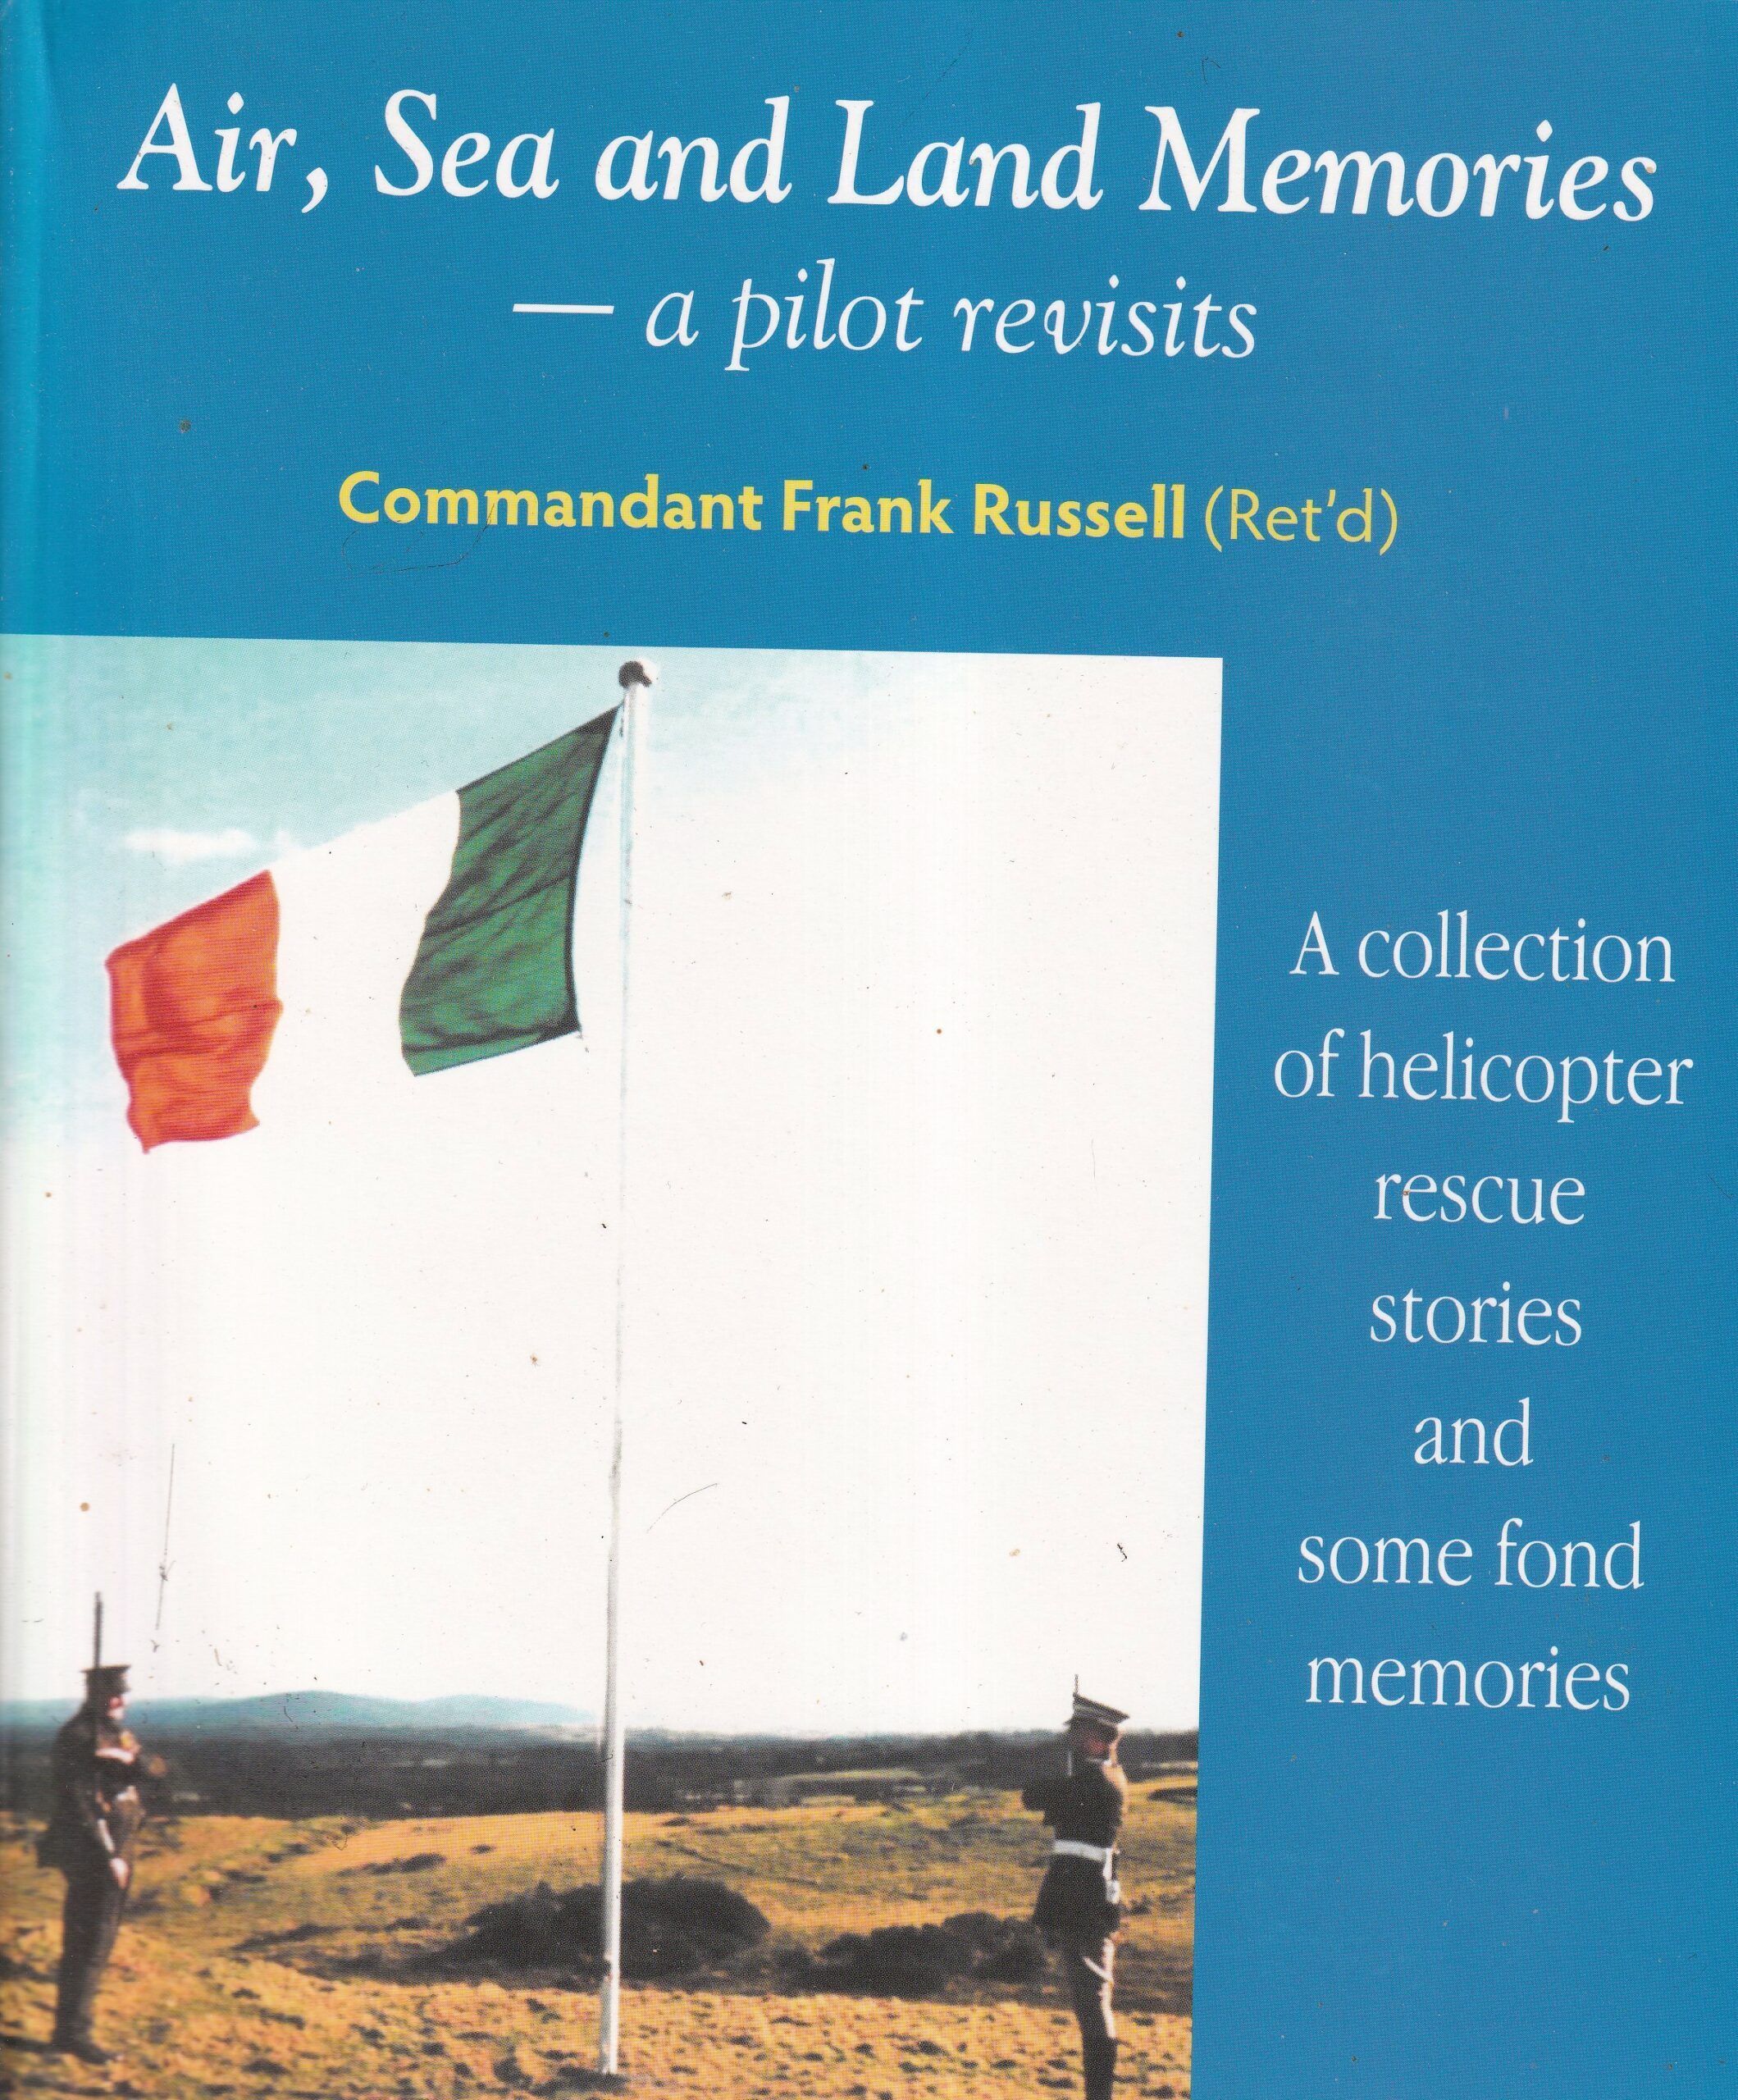 Air, Sea and Land Memories- A Pilot Revisits: A Collection of Helicopter Rescue Stories and Some Fond Memories by Frank Russell